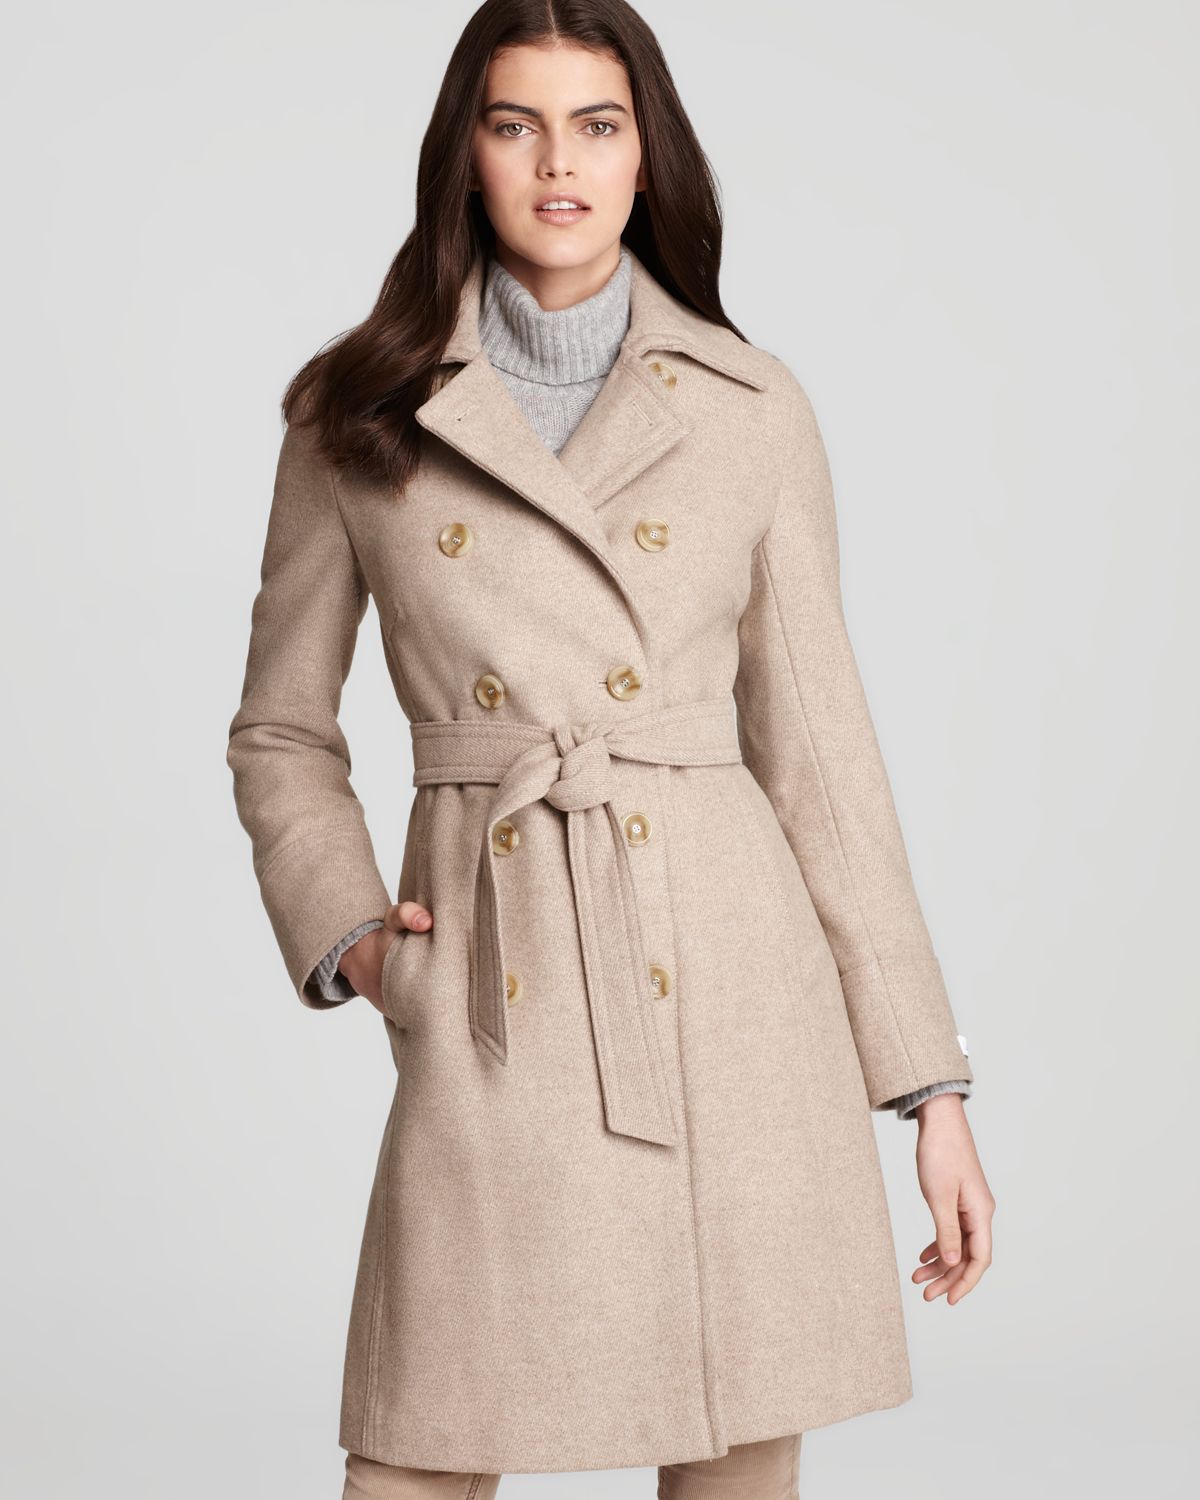 Calvin Klein Double Breasted Belted Trench Coat in Oatmeal (Natural) - Lyst